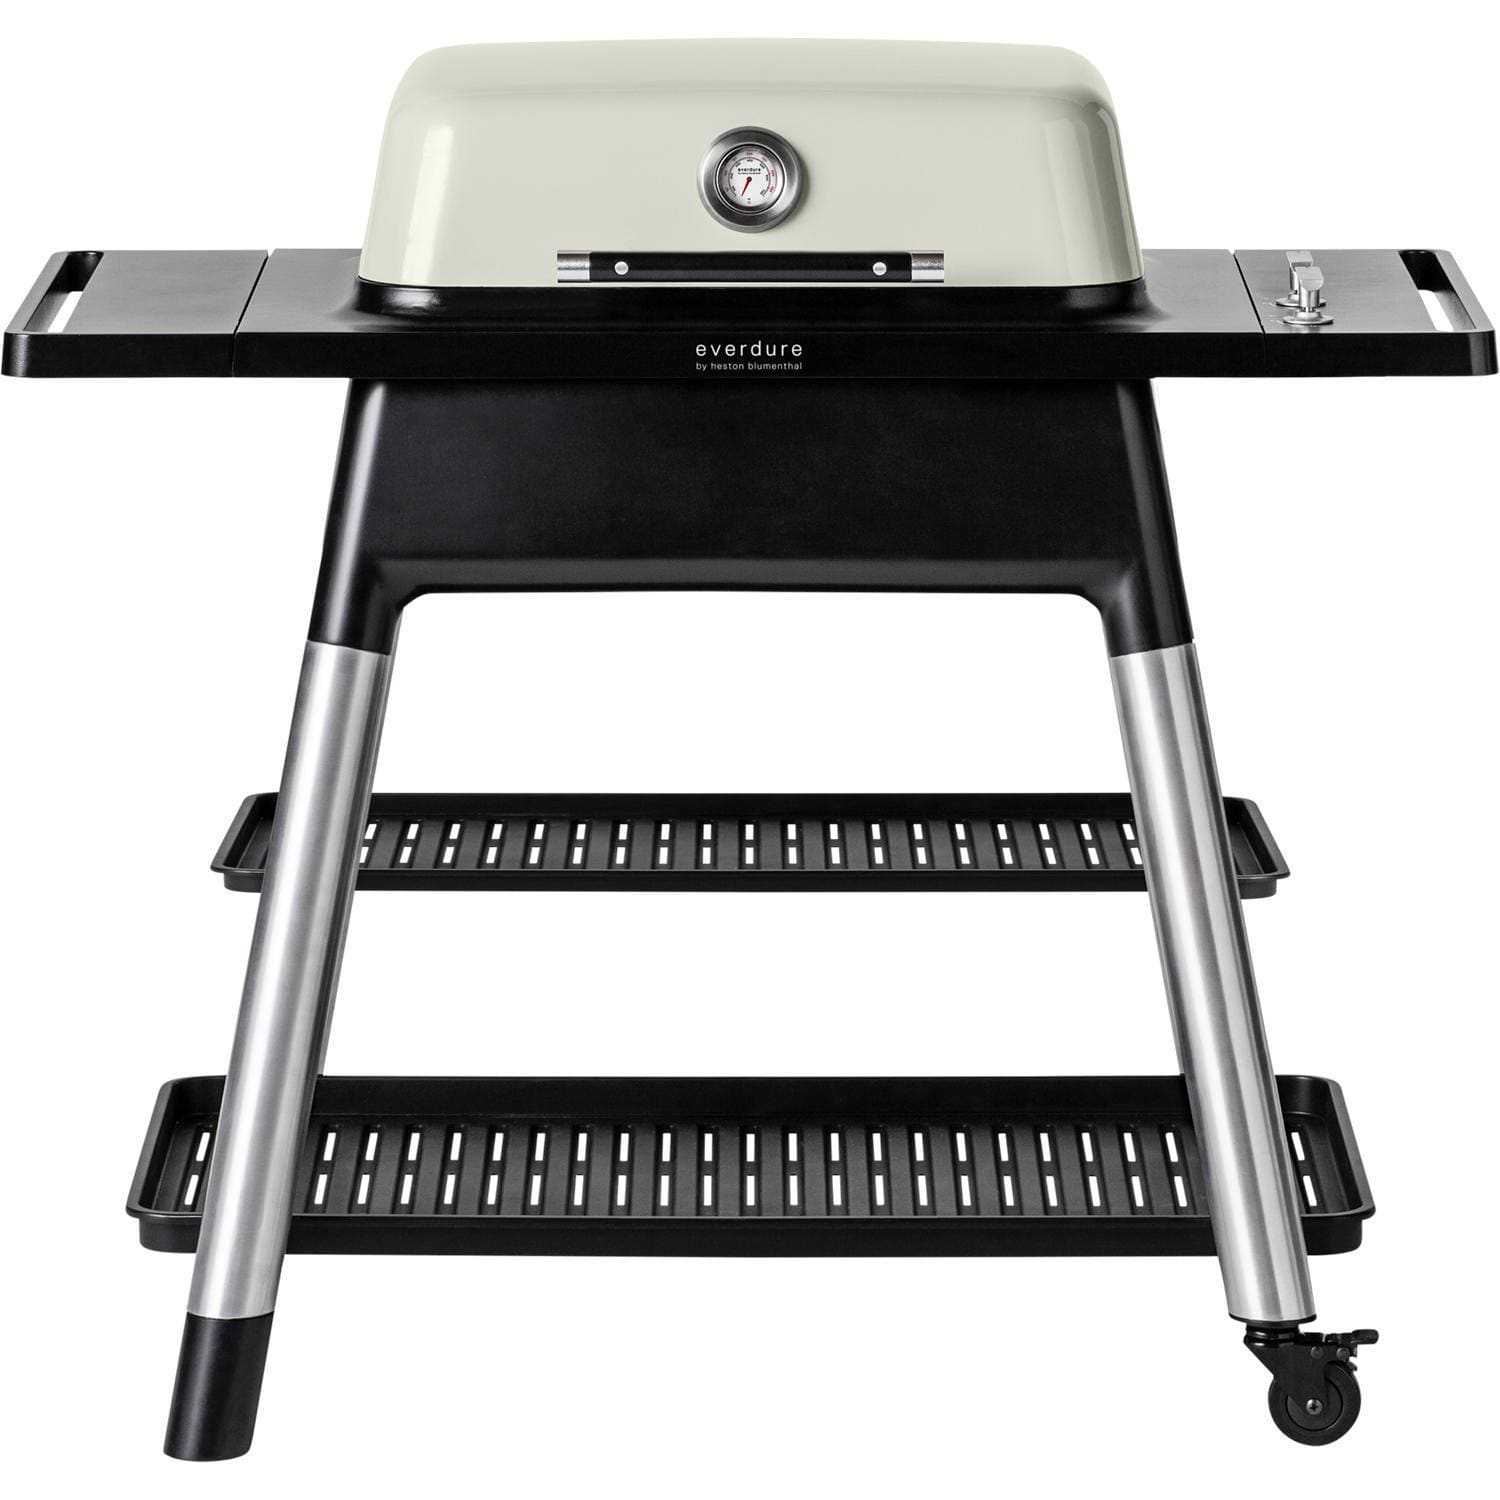 Everdure Propane Gas Grill Stone Everdure By Heston Blumenthal FORCE 48-Inch 2-Burner Propane Gas Grill With Stand